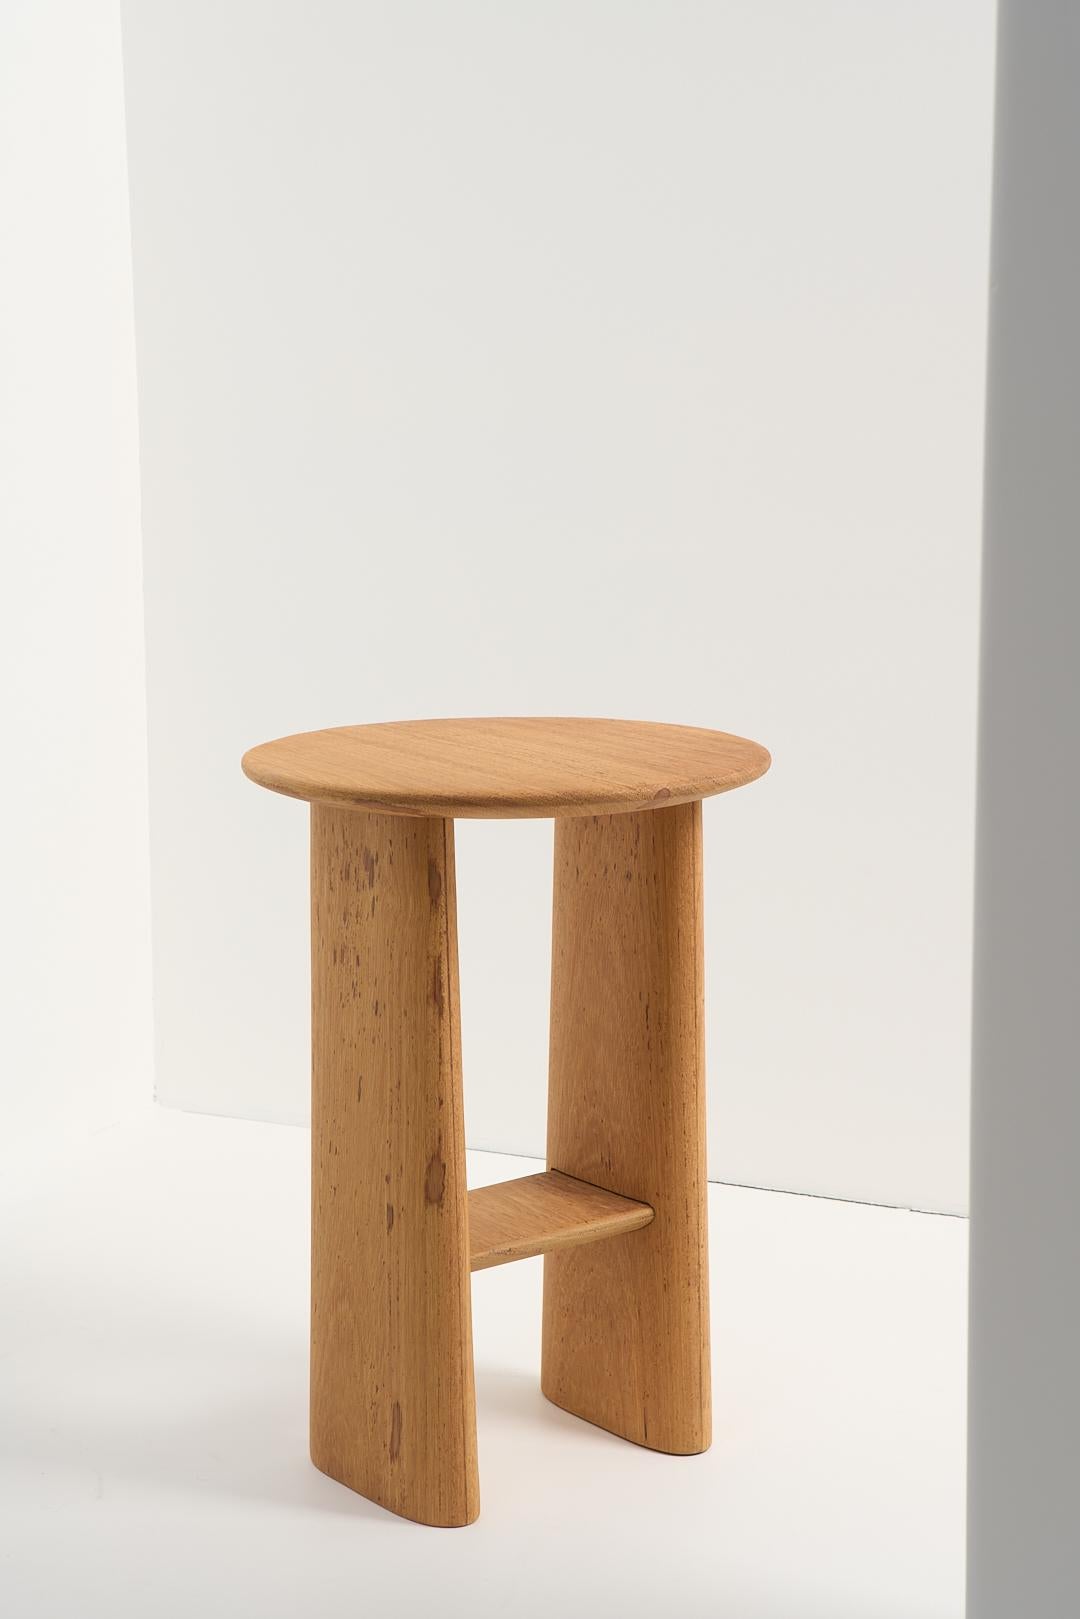 Brazilian Torii Collection, Tall Circular Wooden Side Table For Sale